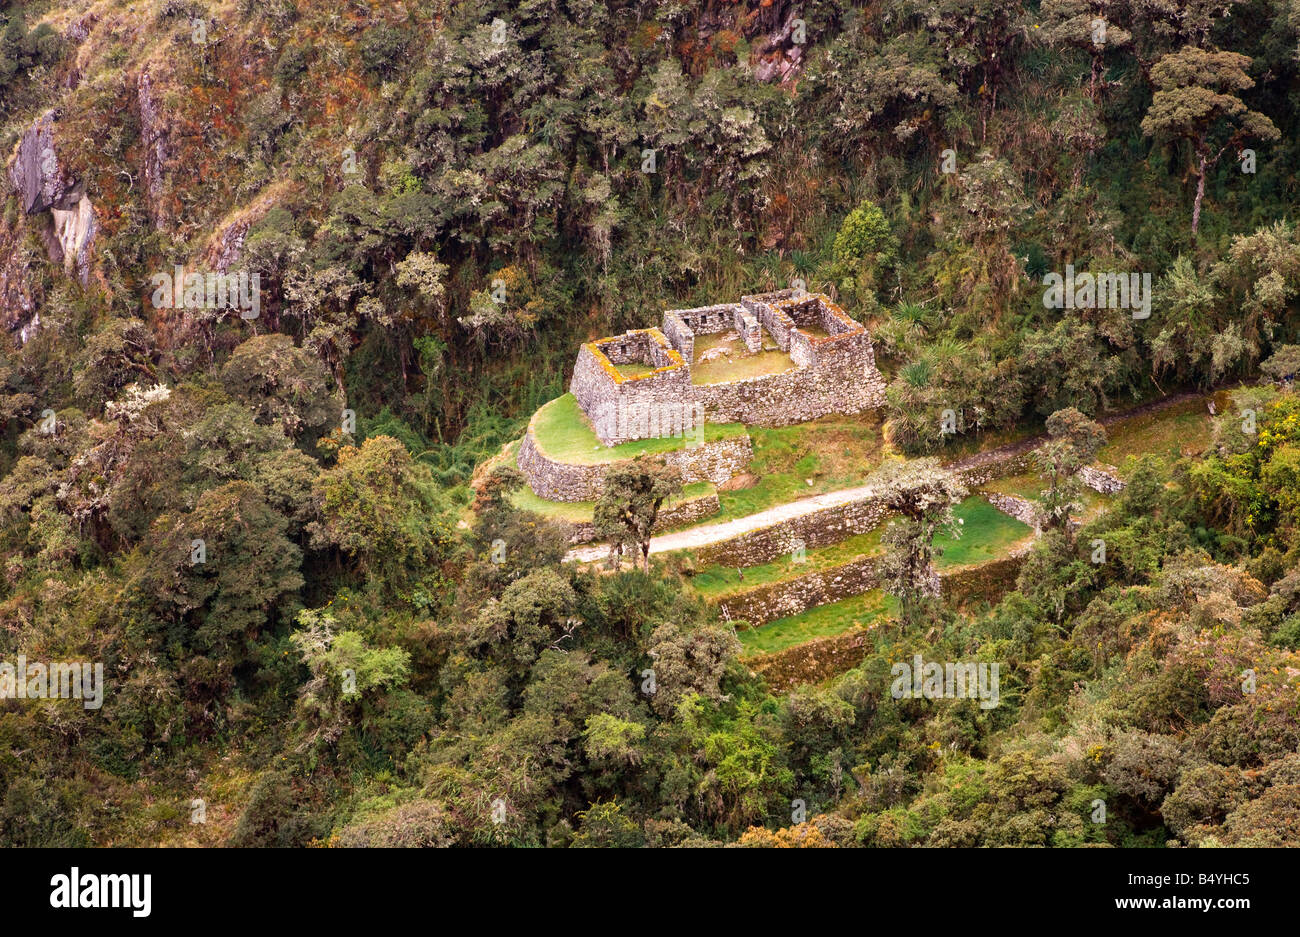 The Incan ruins at the site of Concha Marca or Qonchamarka seen from Sayaqmarka on the third day three of the Inca trail, Peru Stock Photo